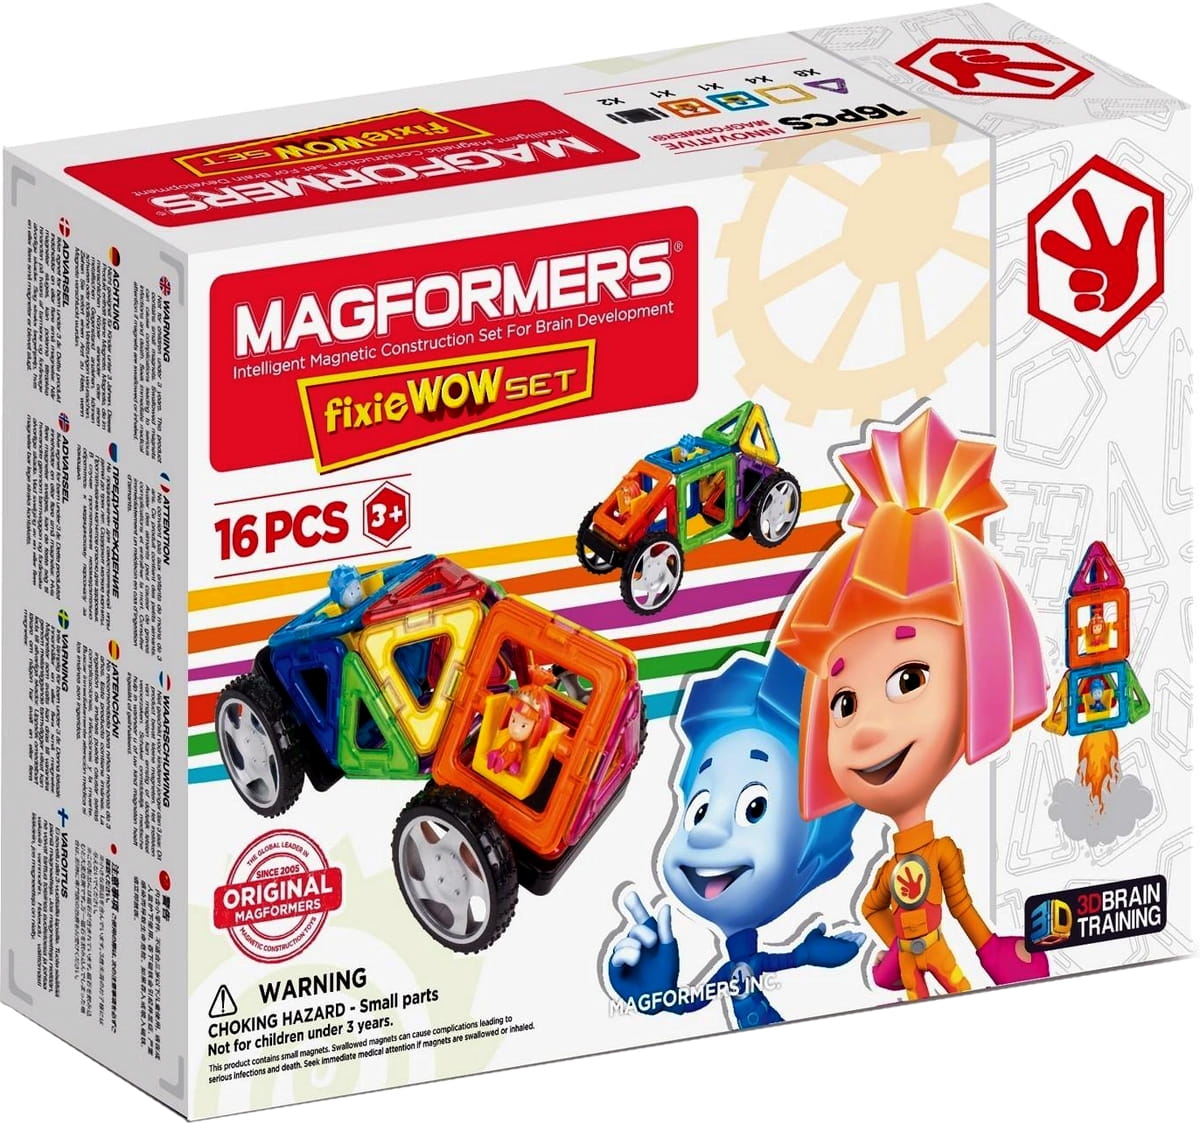    Magformers Fixie Wow set (16 )